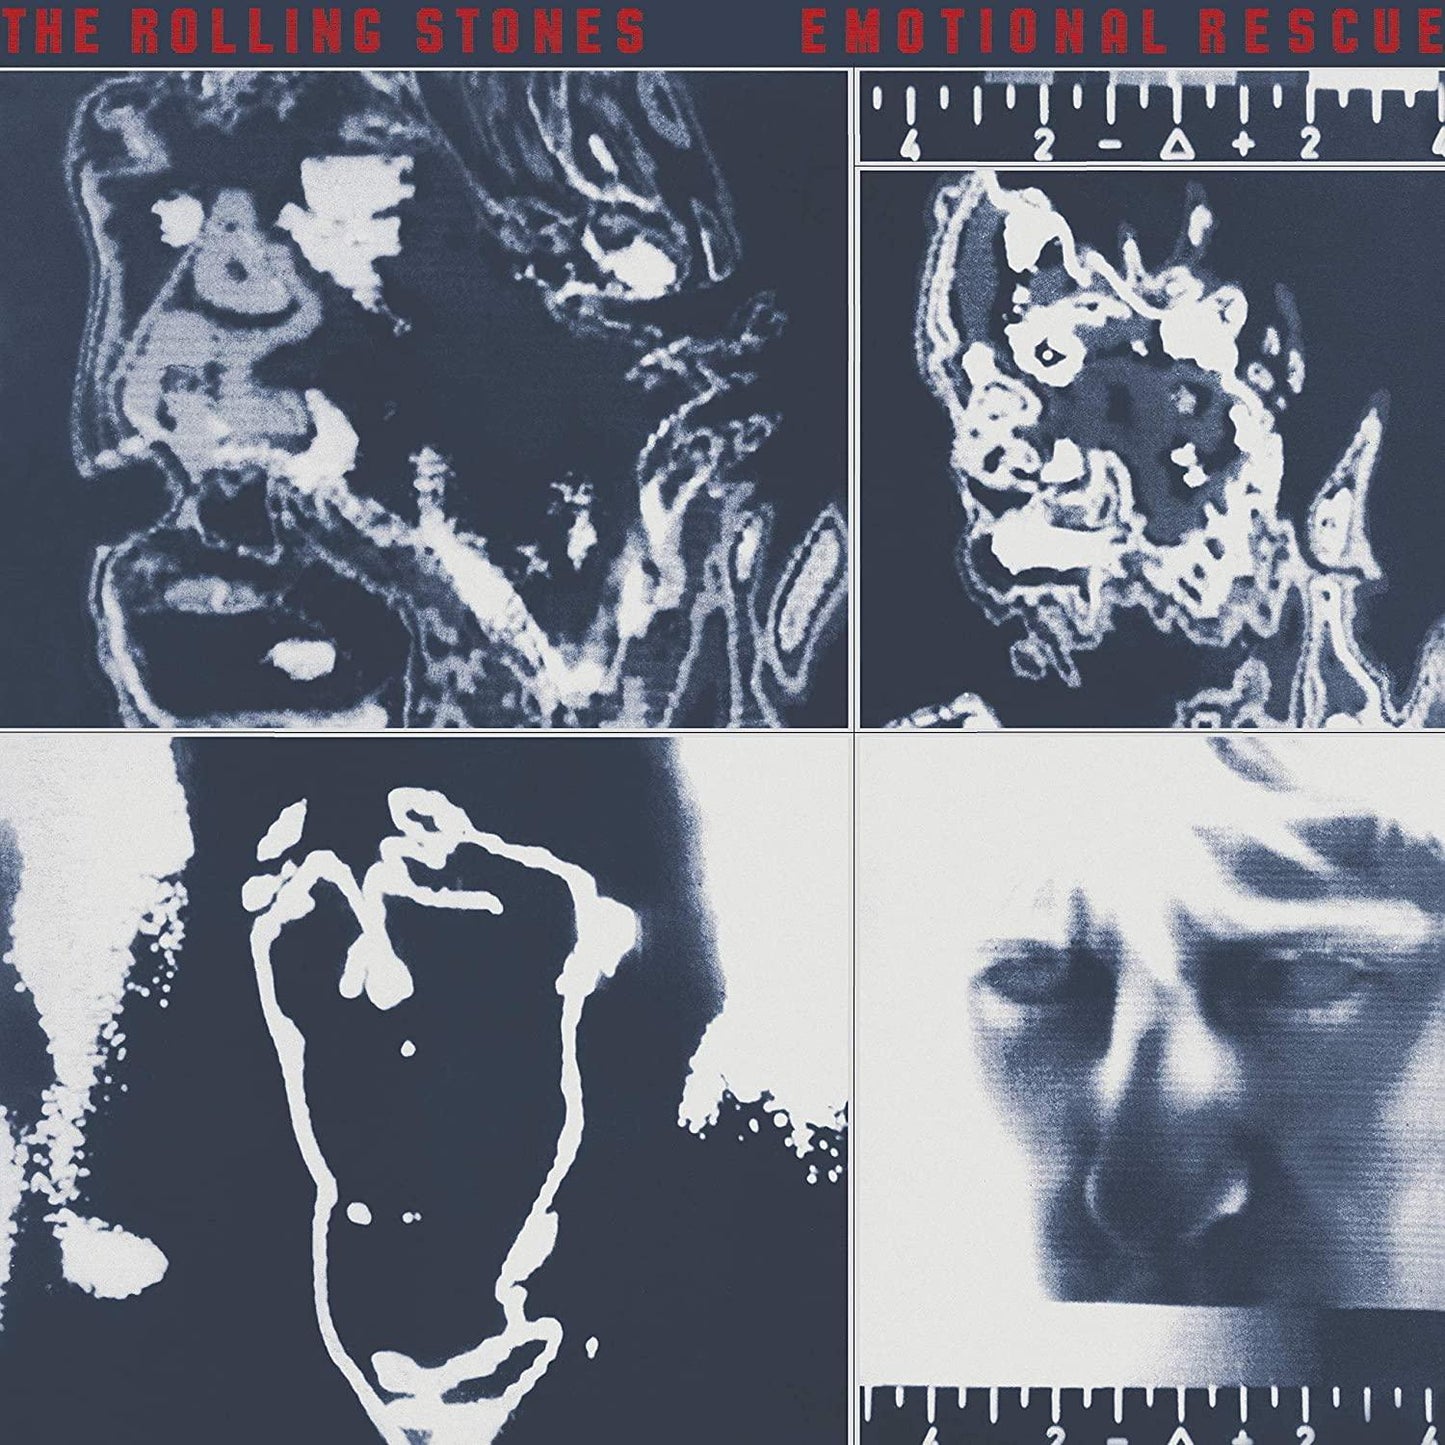 The Rolling Stones - Emotional Rescue (Remastered, 180 Gram) (LP) - Joco Records